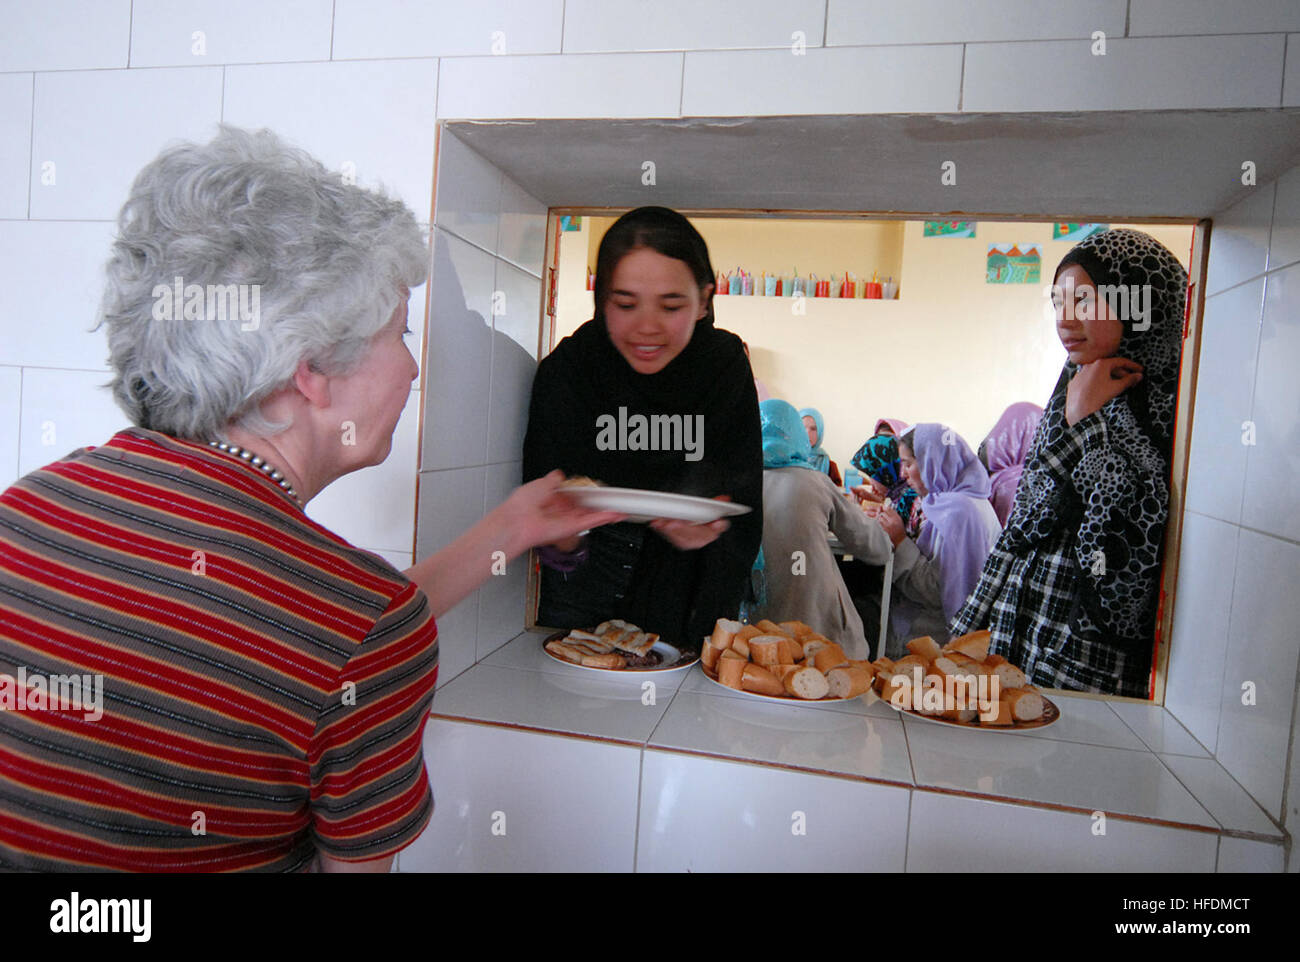 100411-N-9594C-072 KABUL, Afghanistan (April 11, 2010) –Le Pelican School director, Ariane Hiriart, left, passes a student’s plate of food to Fawzia, school supervisor, during lunch. The school currently has 204 students, ranging in age from eight to thirty-three, who are taught hygiene, math, Dari, Pashto, English, science, geography and other subjects. The school also teaches valuable life skills in a fully functioning bakery that sells baguettes, croissants and other French-style breads in the near-by area. A team from the Volunteer Community Relations program at Camp Eggers visited the sch Stock Photo